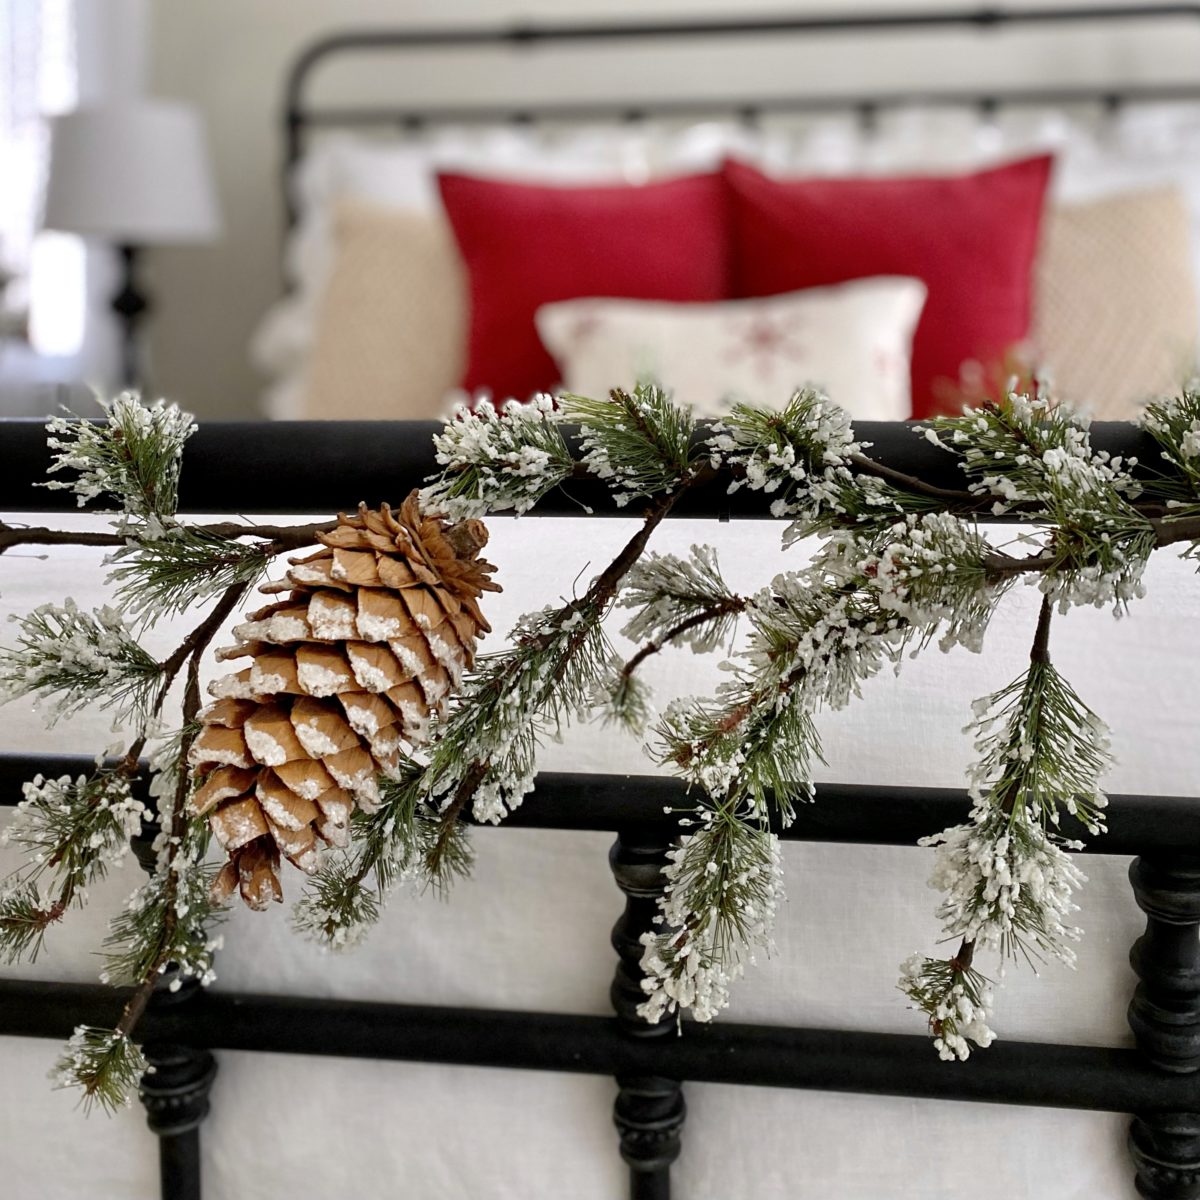 Green garland with snowy tips attached to the foot of the iron bed.